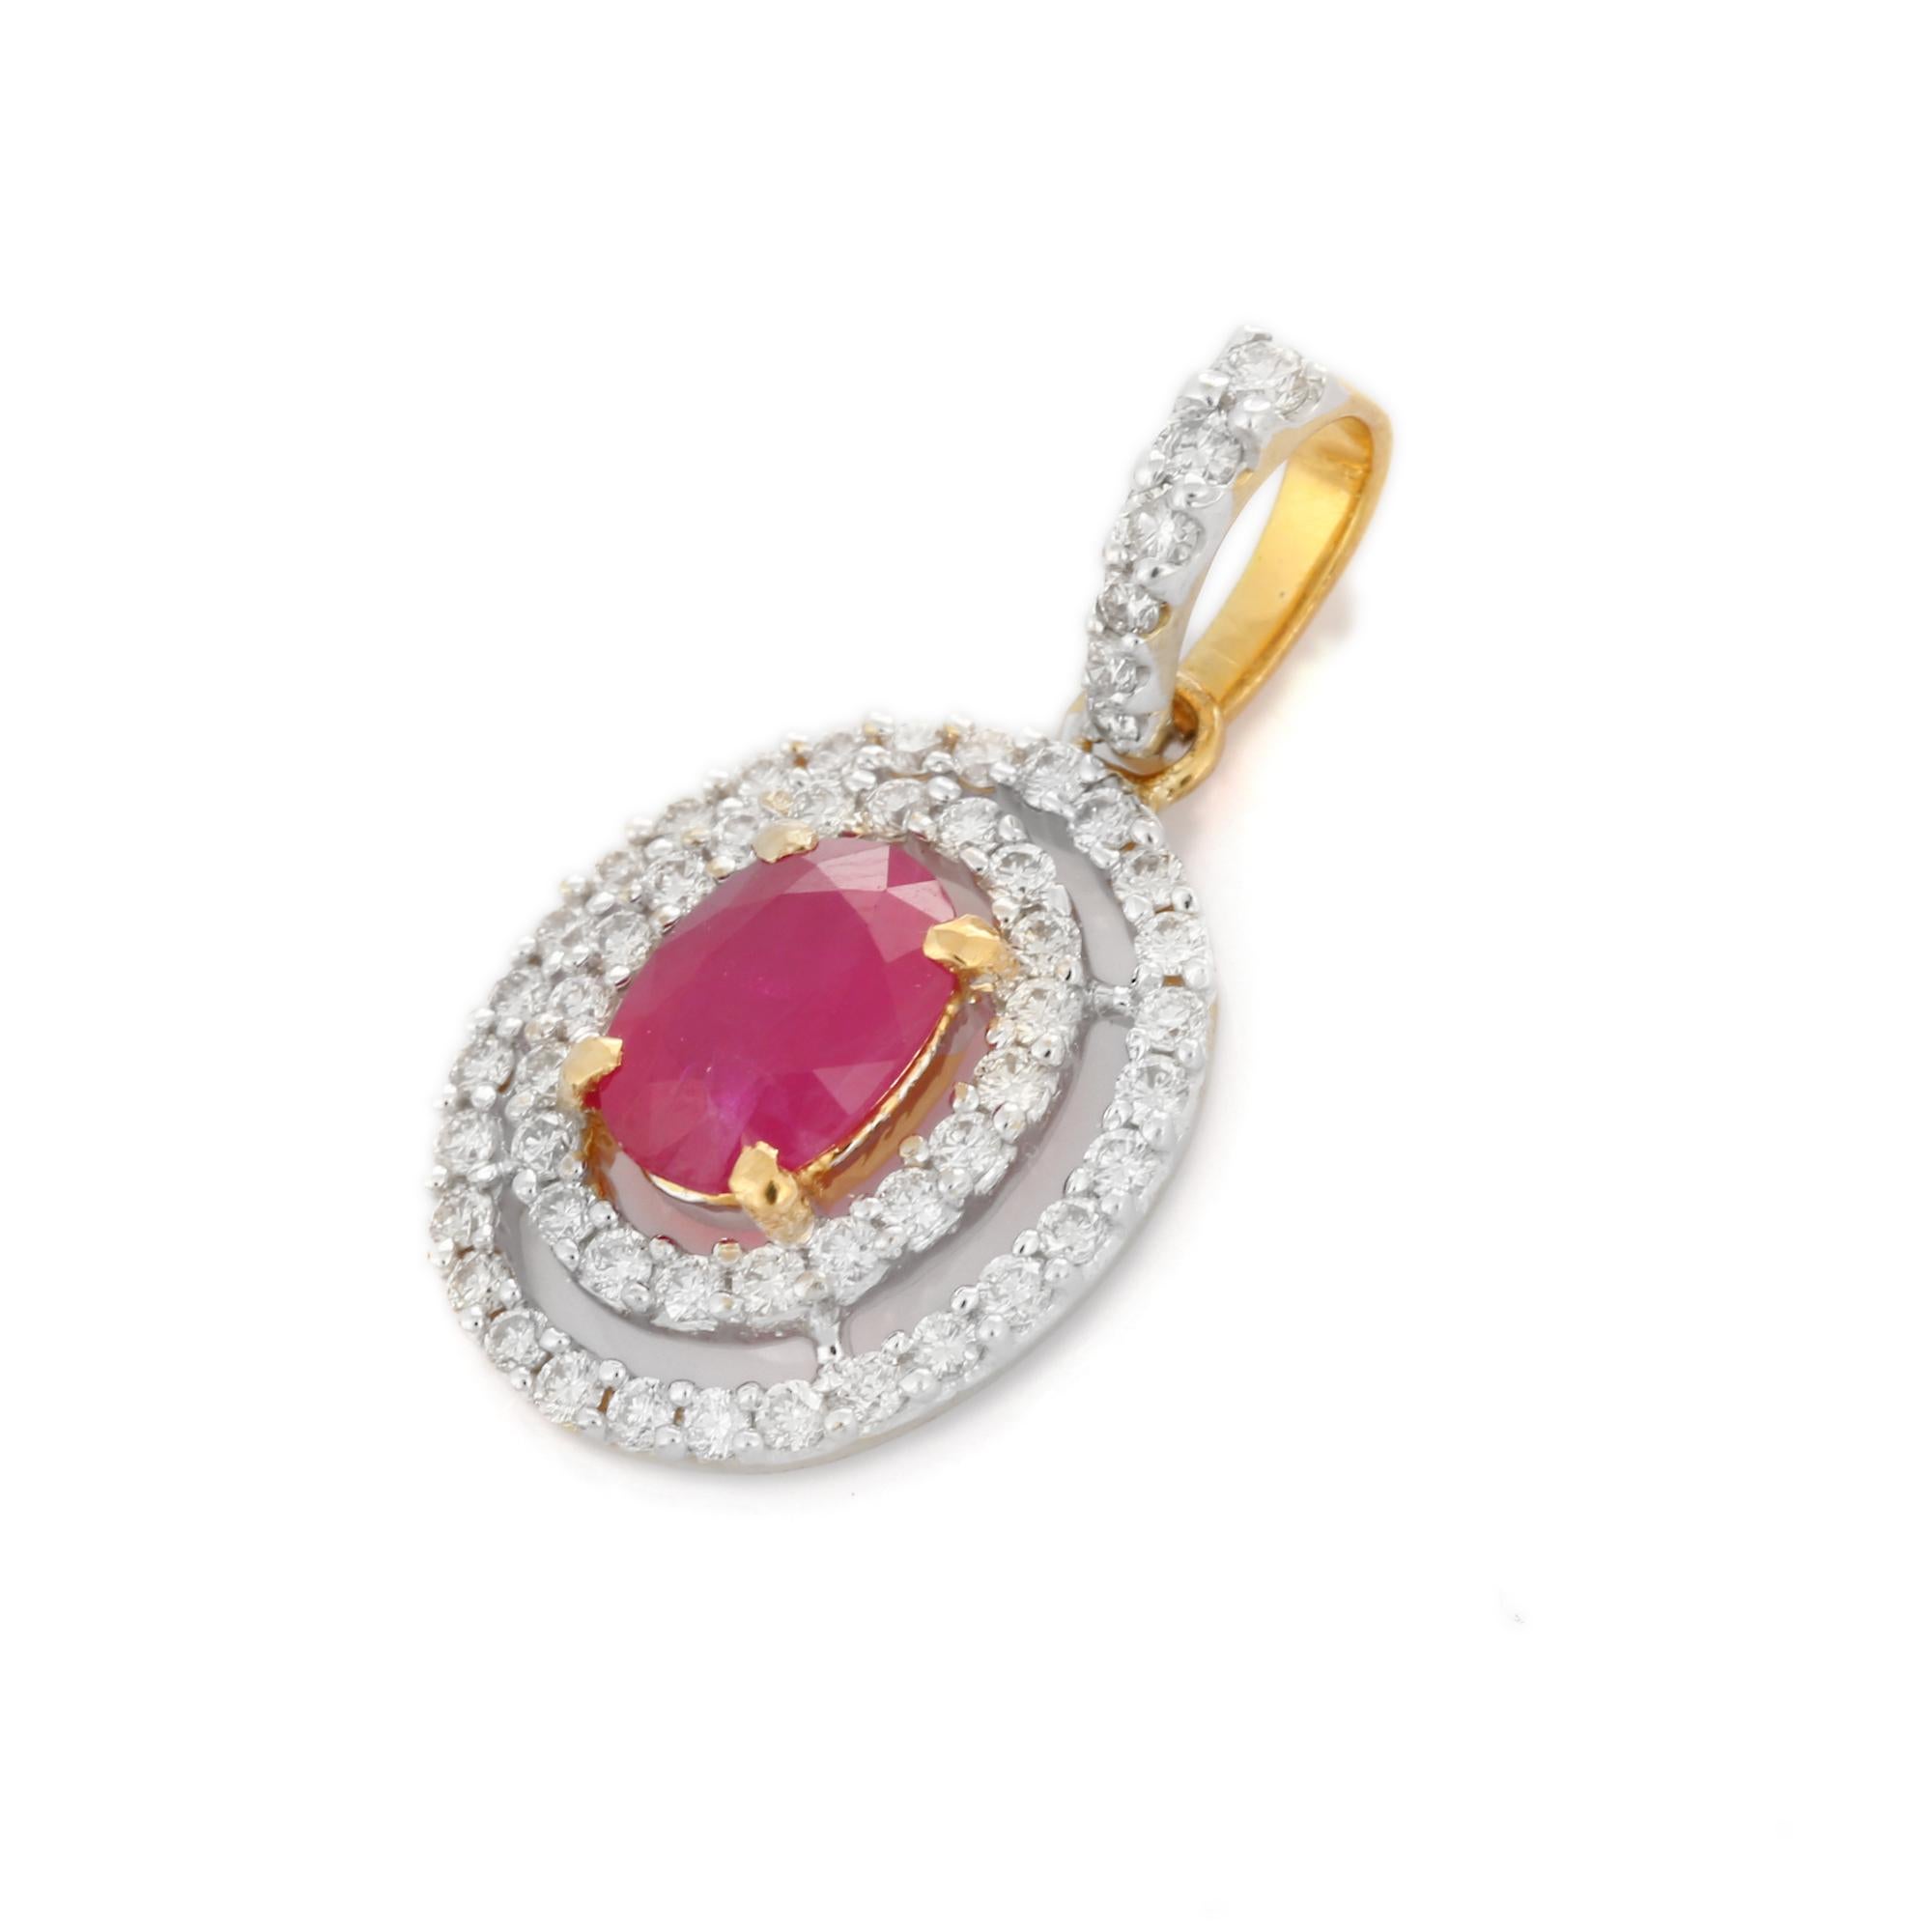 Natural Ruby Pendant with Diamonds around studded in 18K Gold. It has a oval cut ruby with diamonds that completes your look with a decent touch. Pendants are used to wear or gifted to represent love and promises. It's an attractive jewelry piece